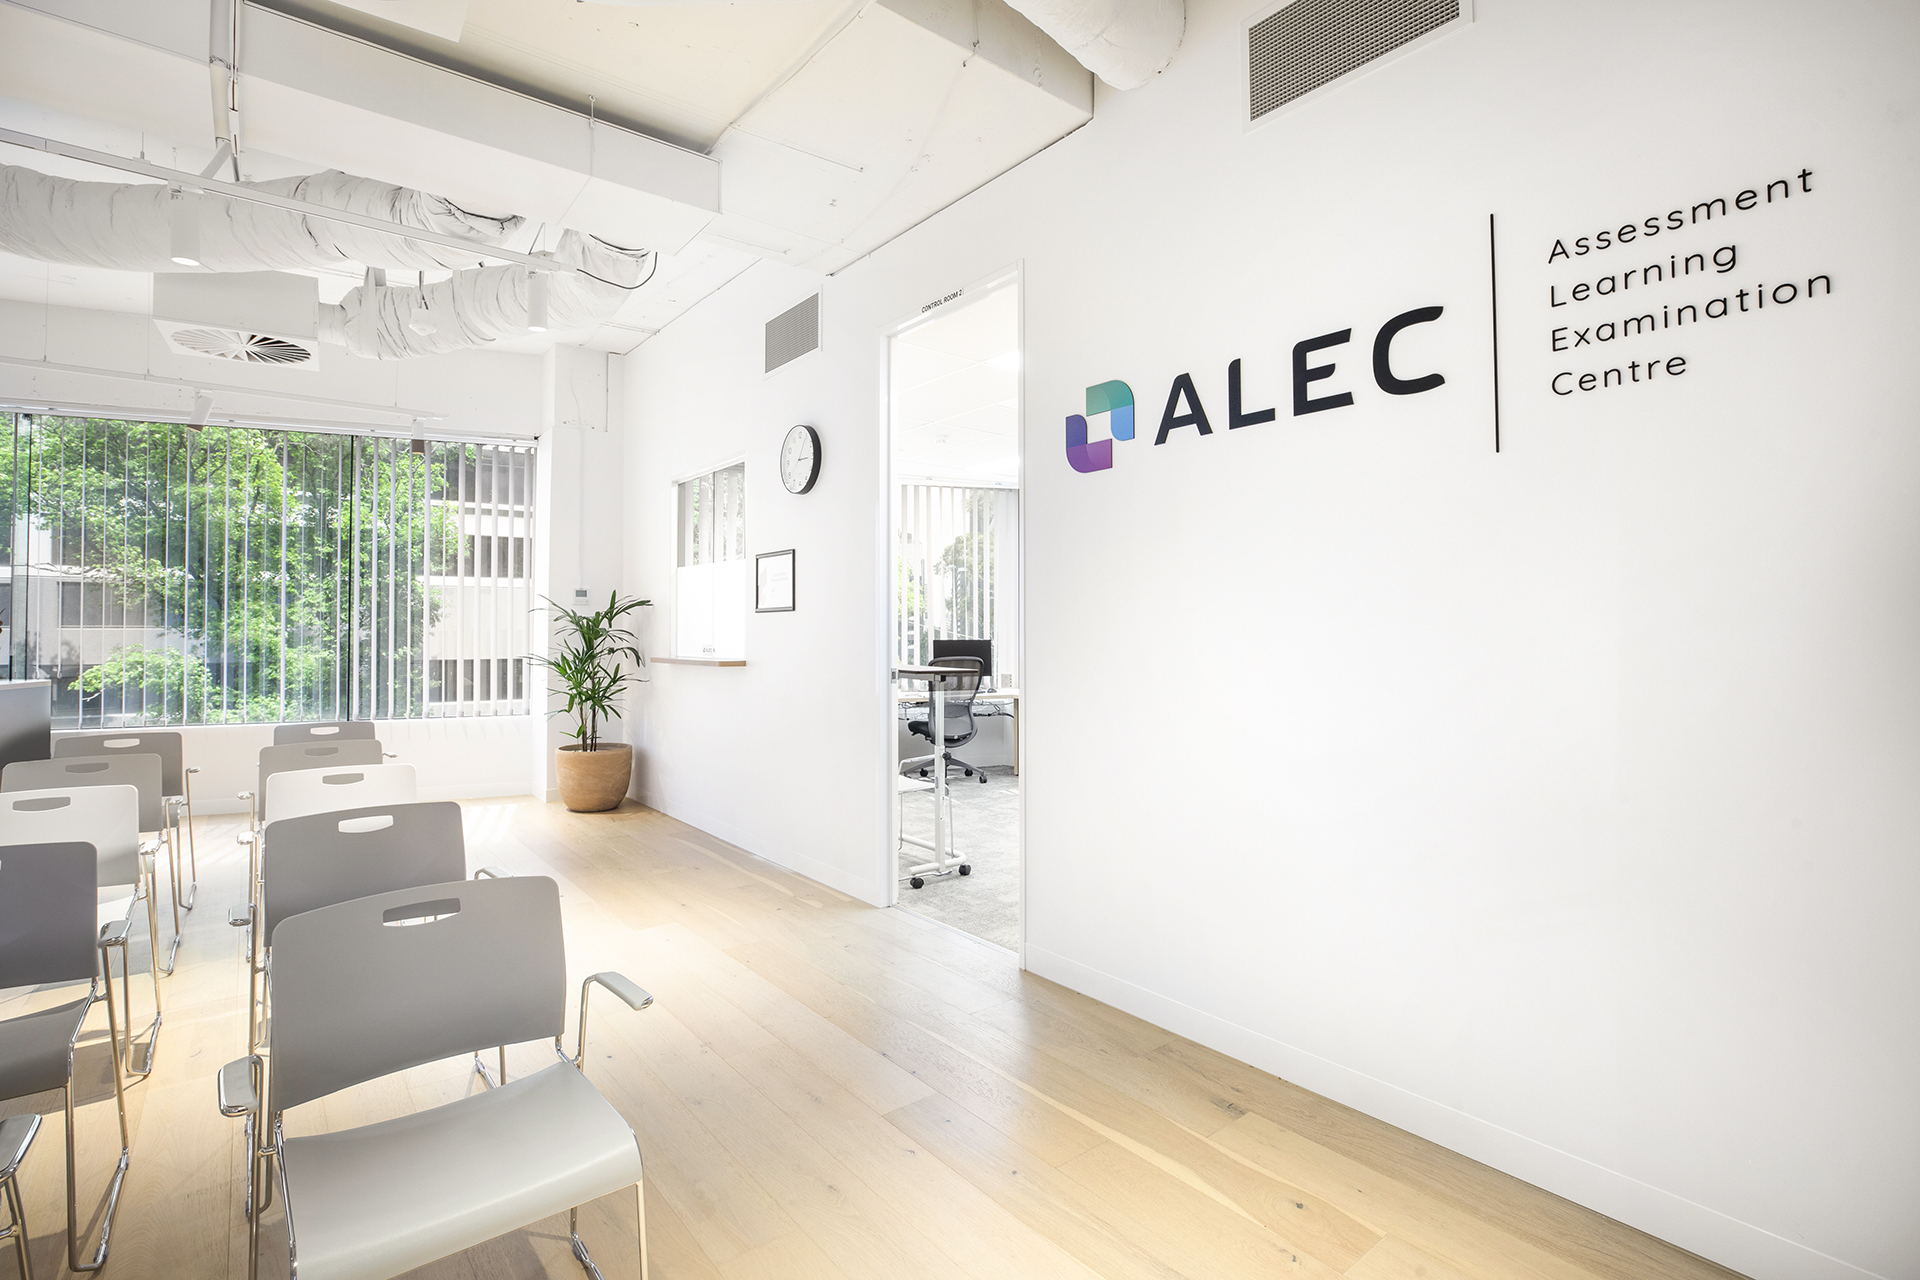 ALEC Assessment Learning Examination Centre - Meeting